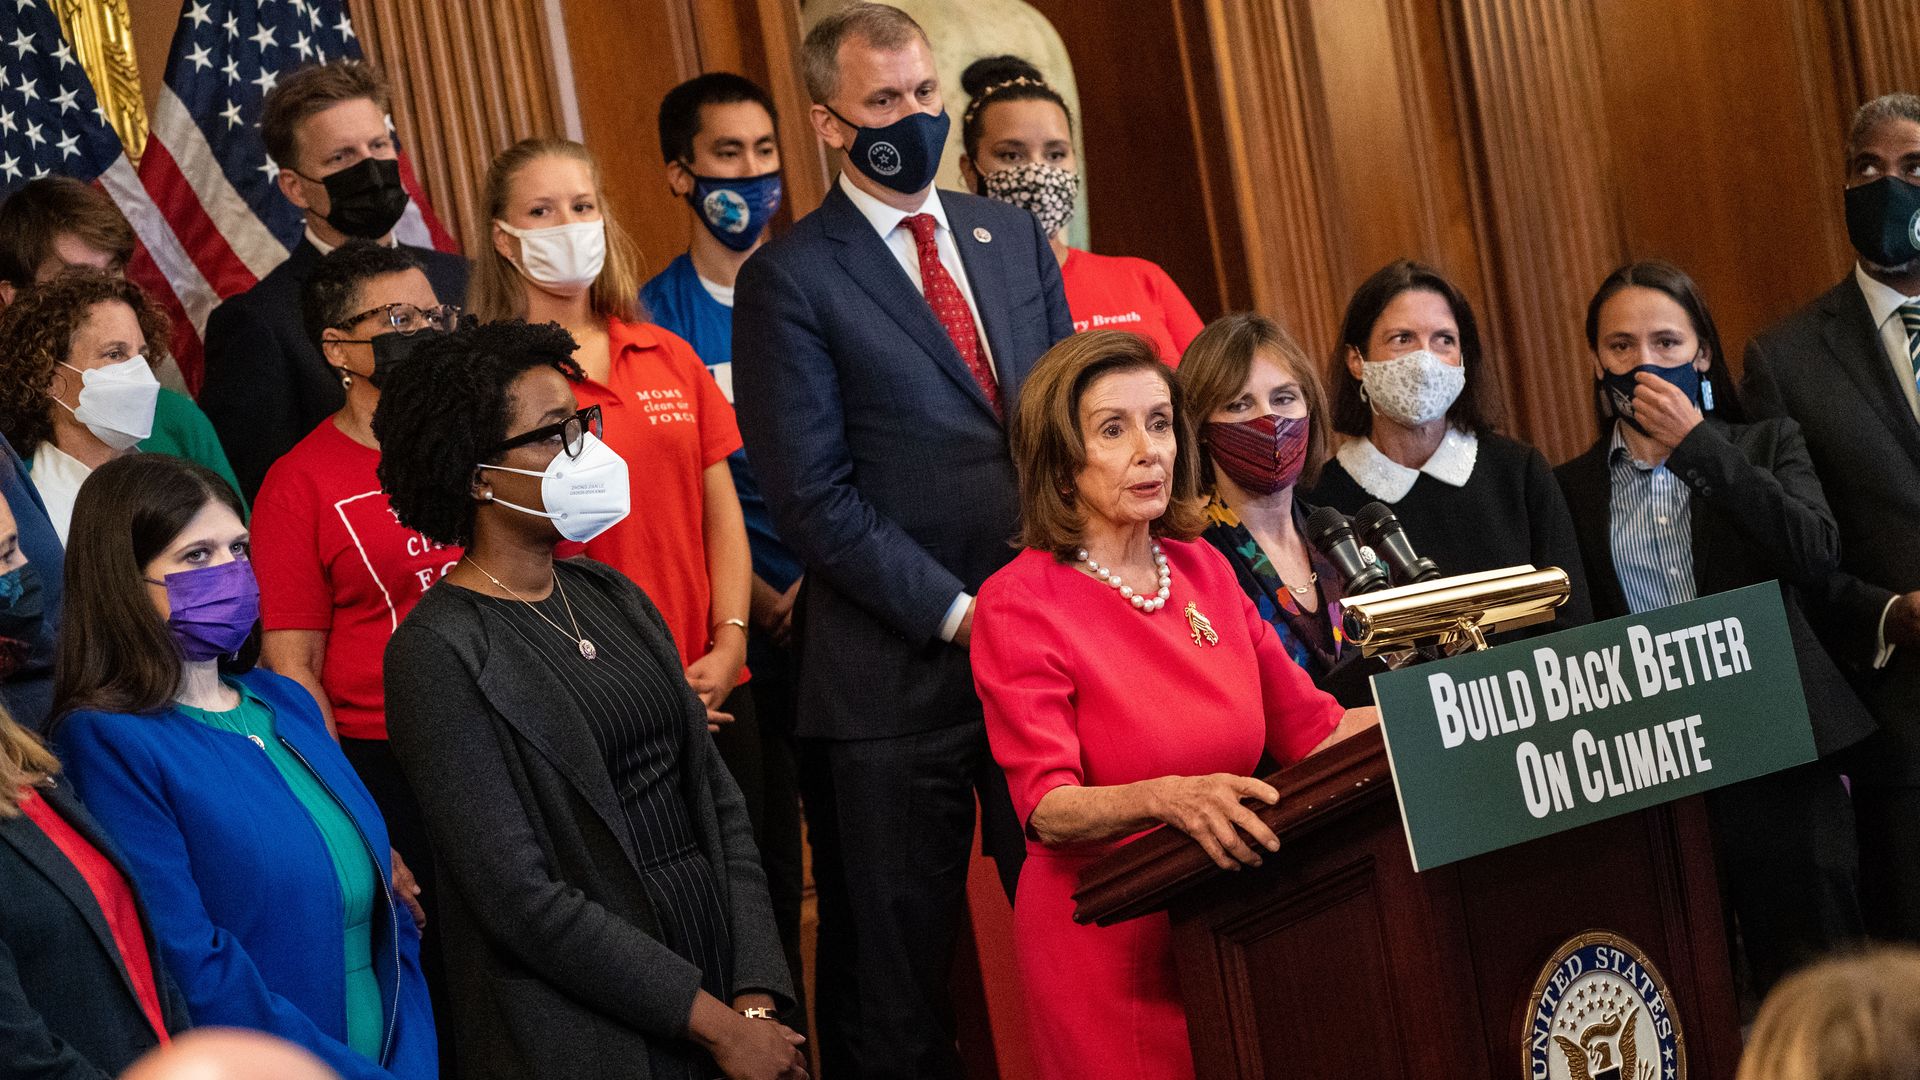 Speaker of the House Nancy Pelosi (D-CA) speaks during an event with House Democrats and climate activists to highlight the aspects of the Build Back Better Act 